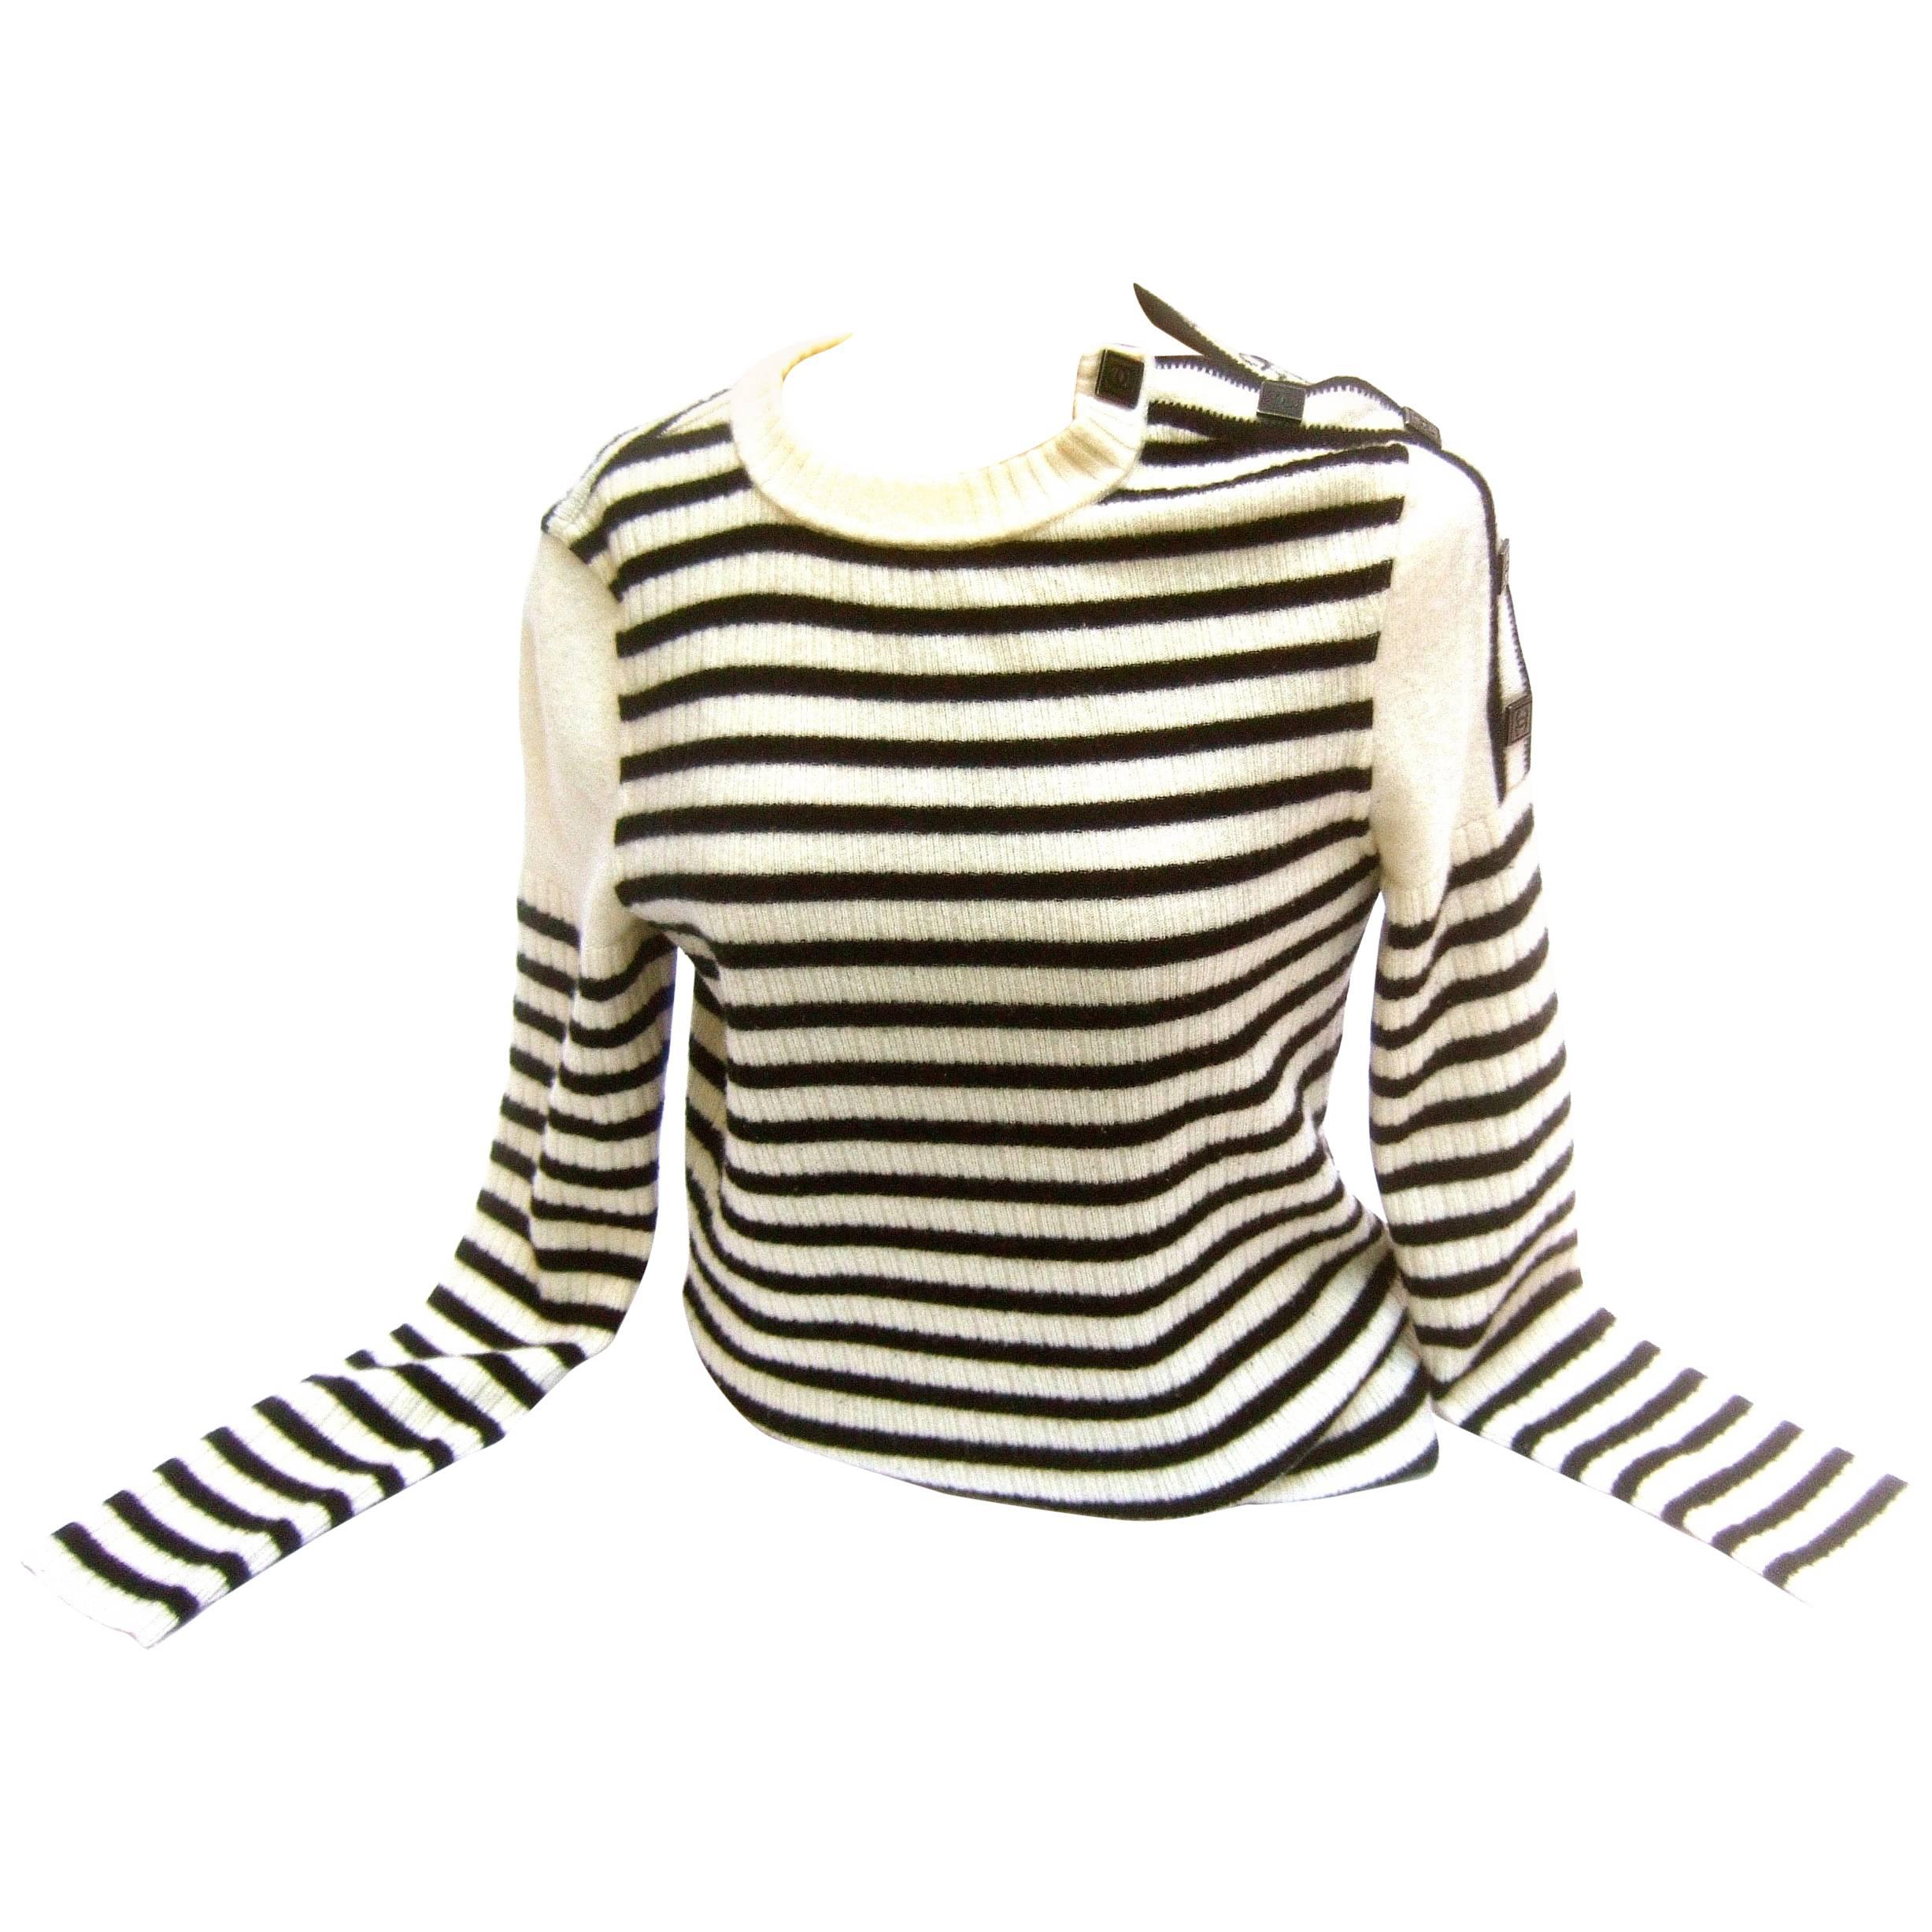 Chanel Nautical Theme Striped Wool Italian Sweater with Chanel Buttons 